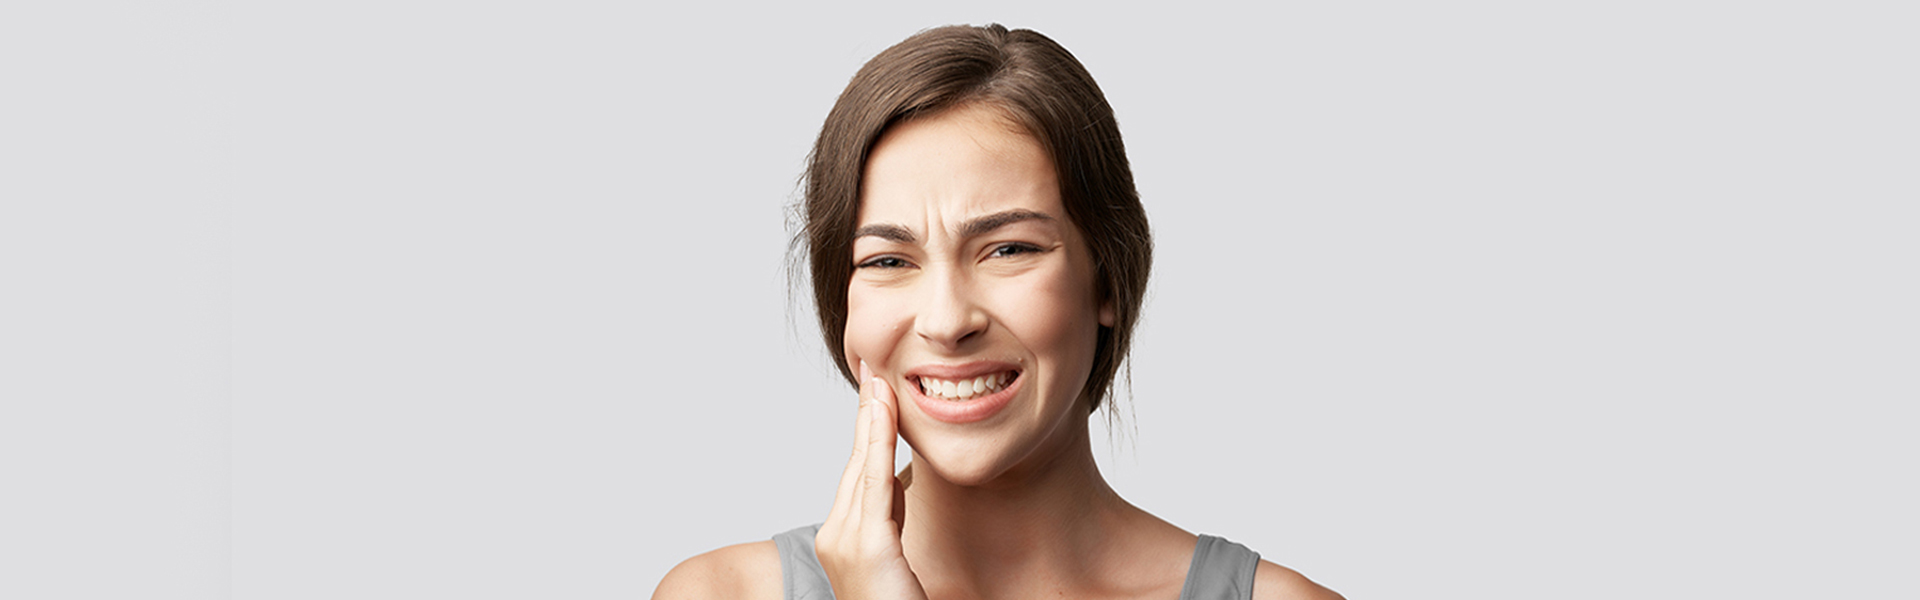 Tooth Extractions 101: Everything You Should Know